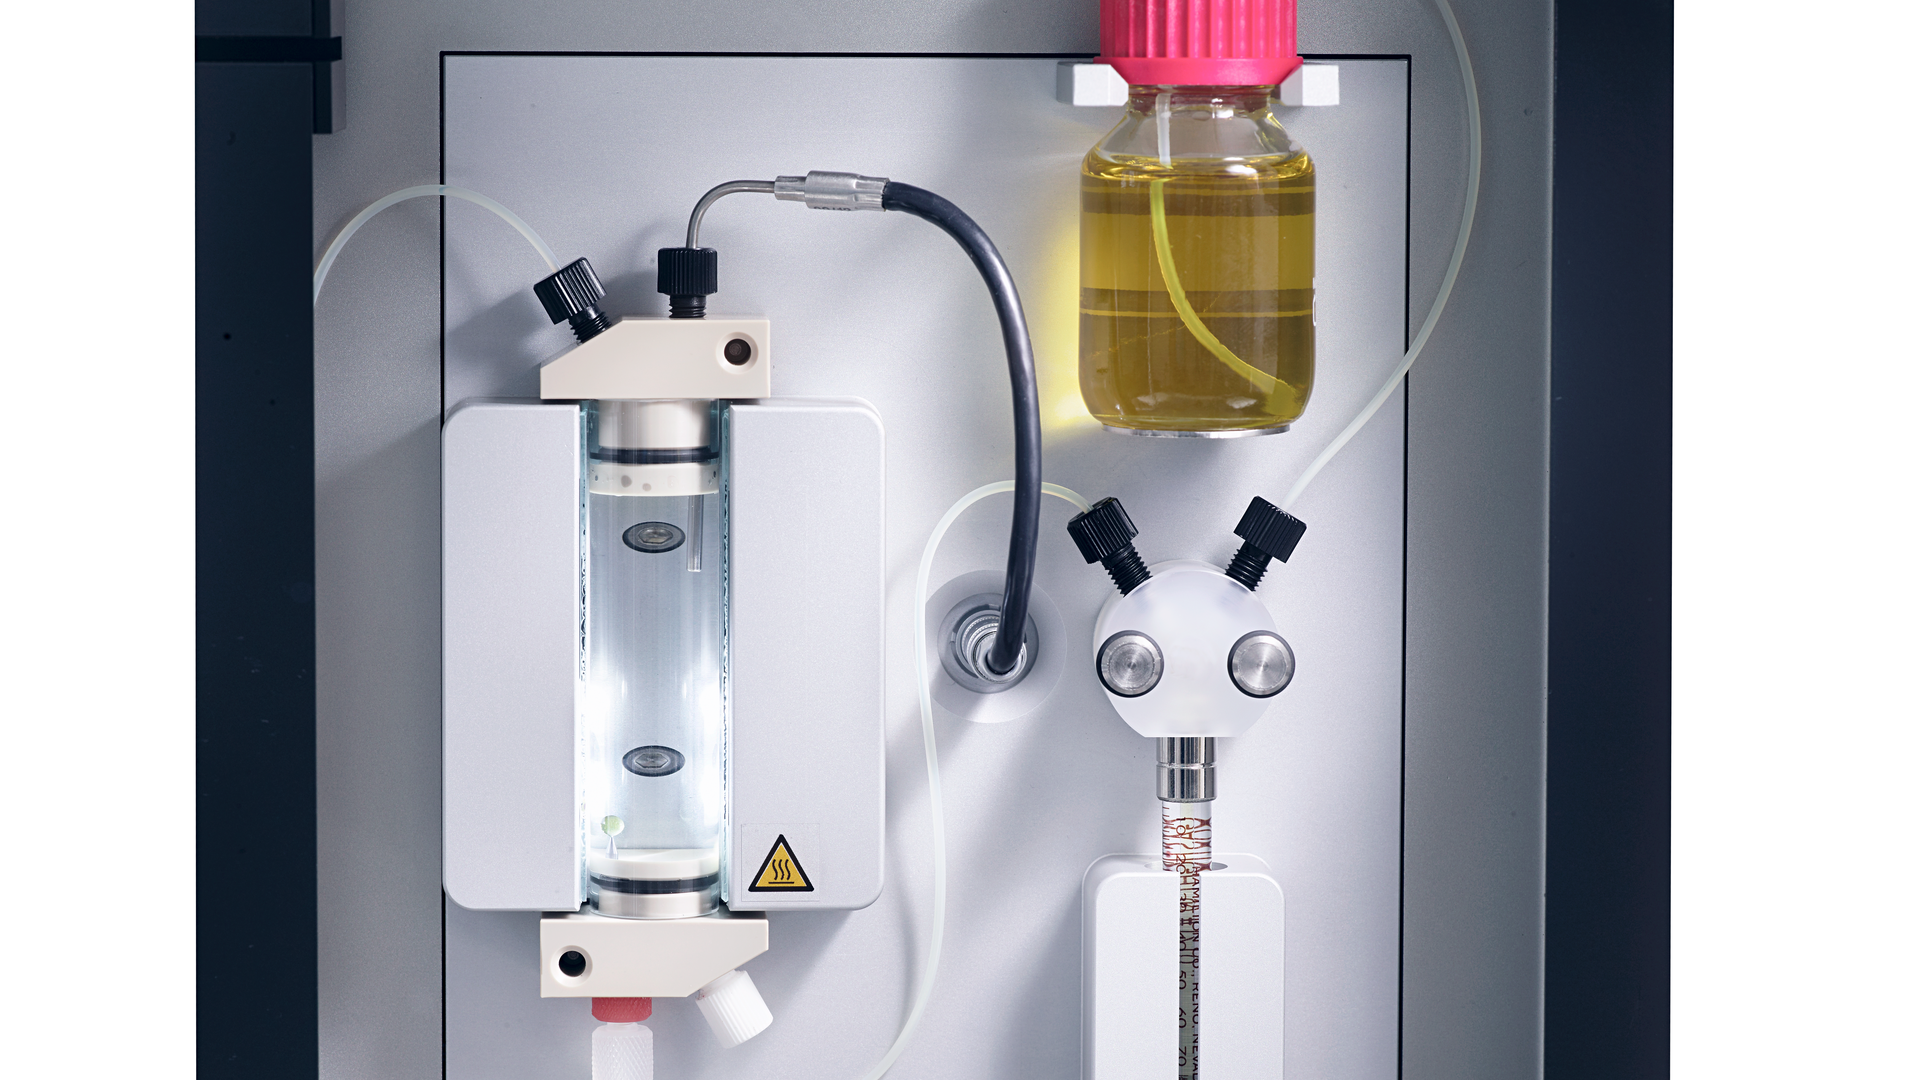 Drop Volume Tensiometer – DVT50 for emulsions under dynamic conditions